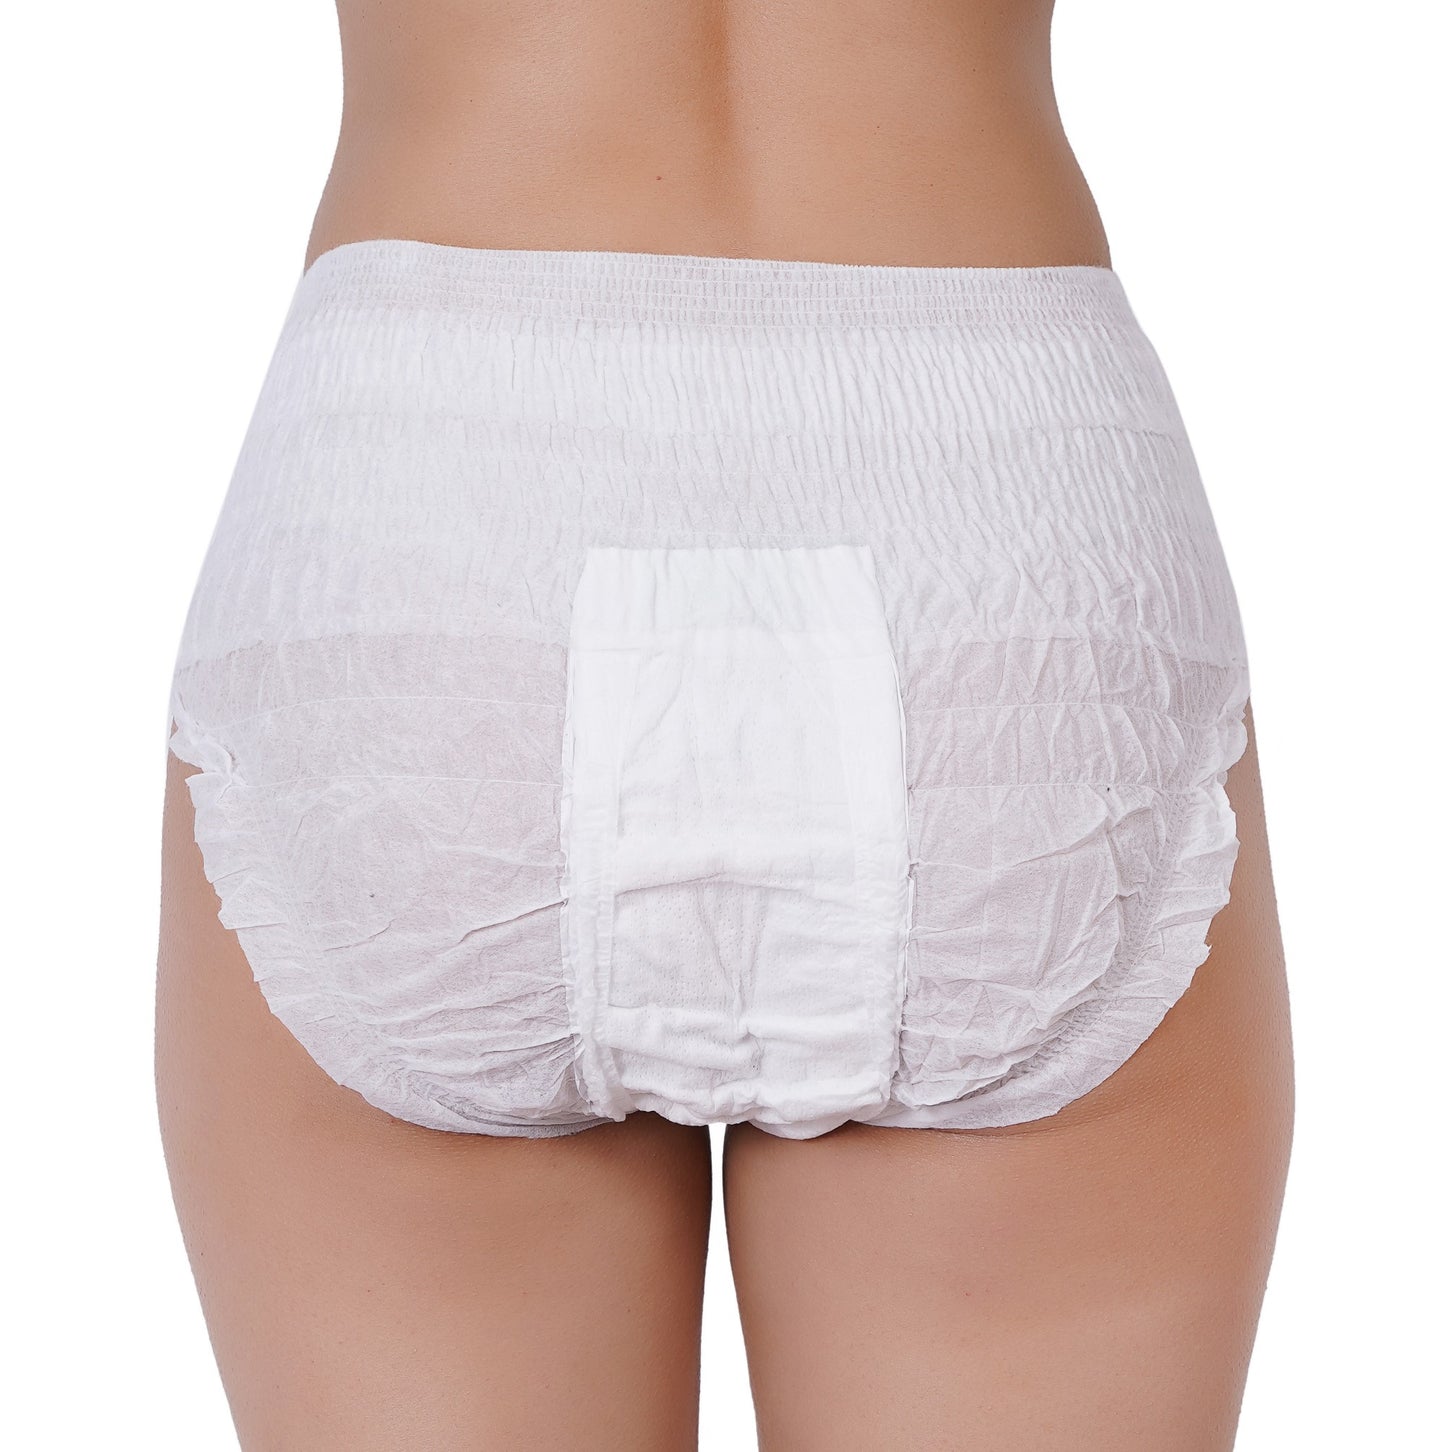 Buy Period Panties 3 Count Disposable Menstrual Underwear with Built-in Pad  by UndiePads Online at Lowest Price Ever in India